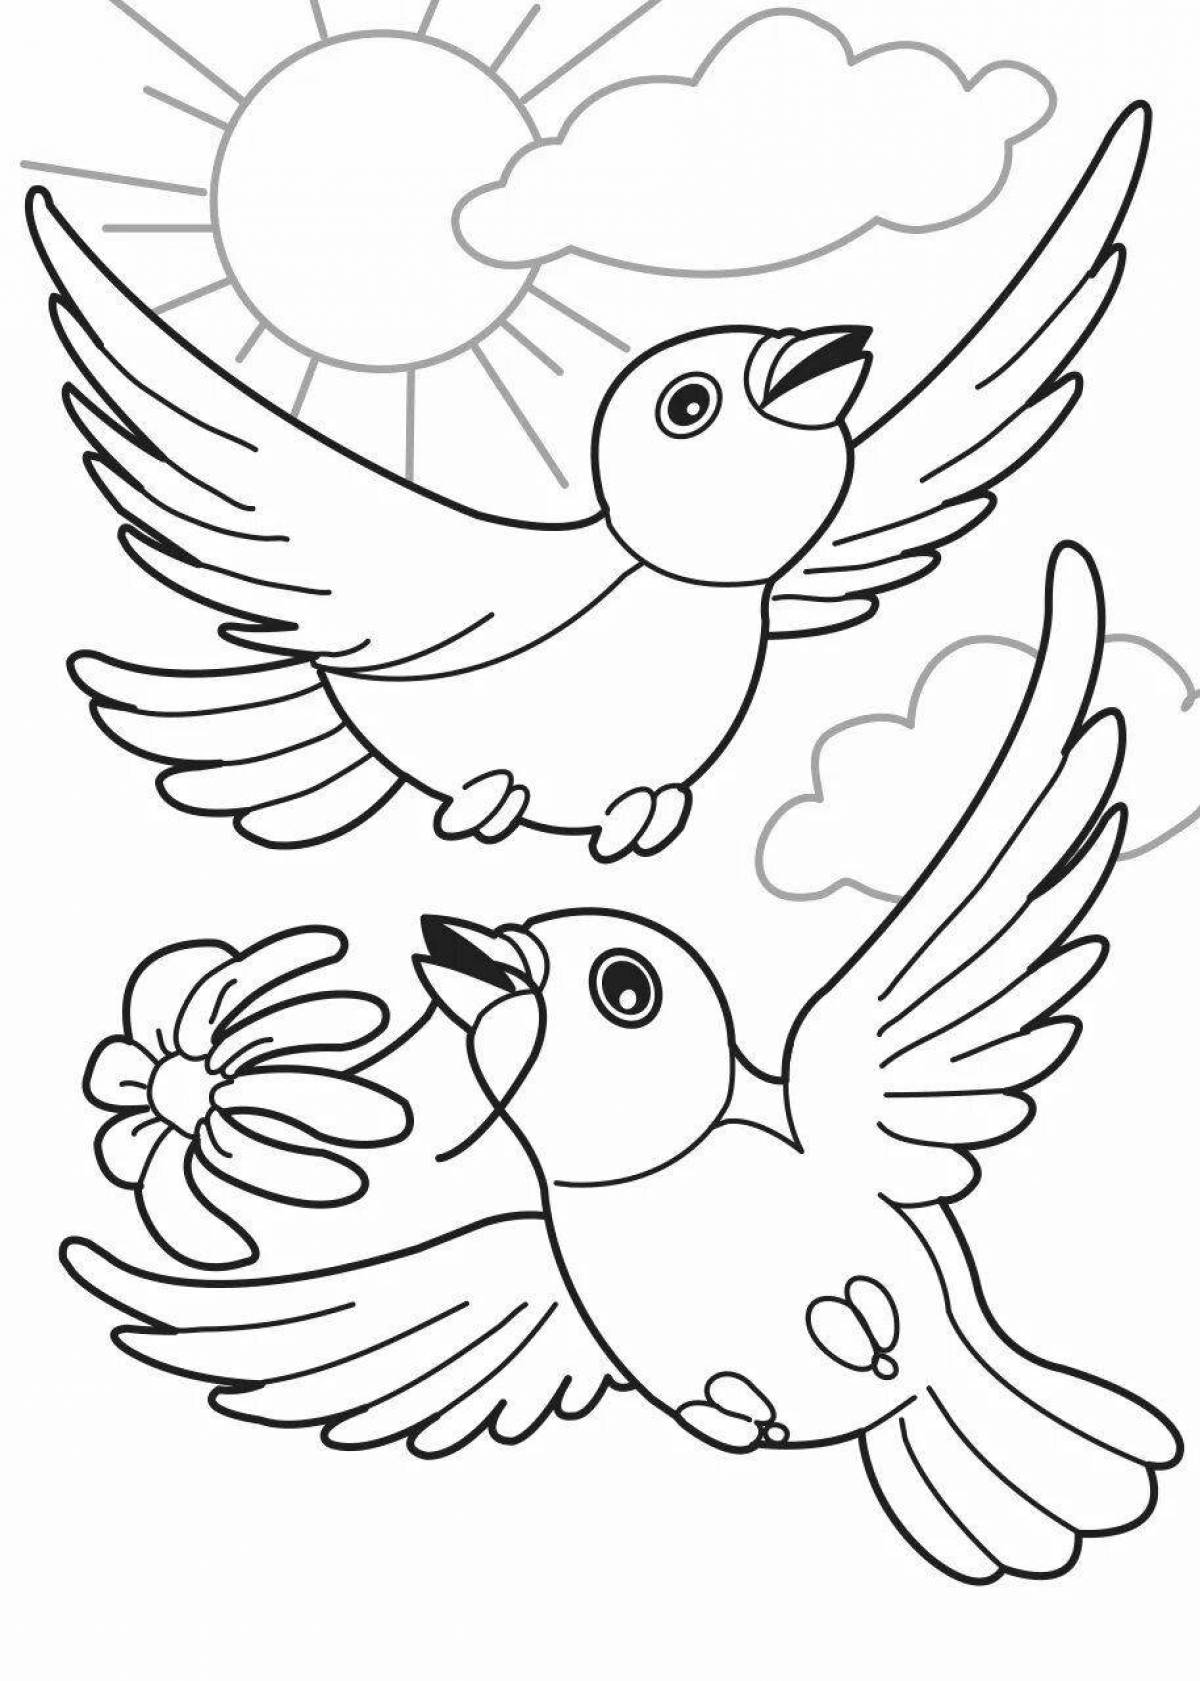 Pretty bird coloring page for 4-5 year olds